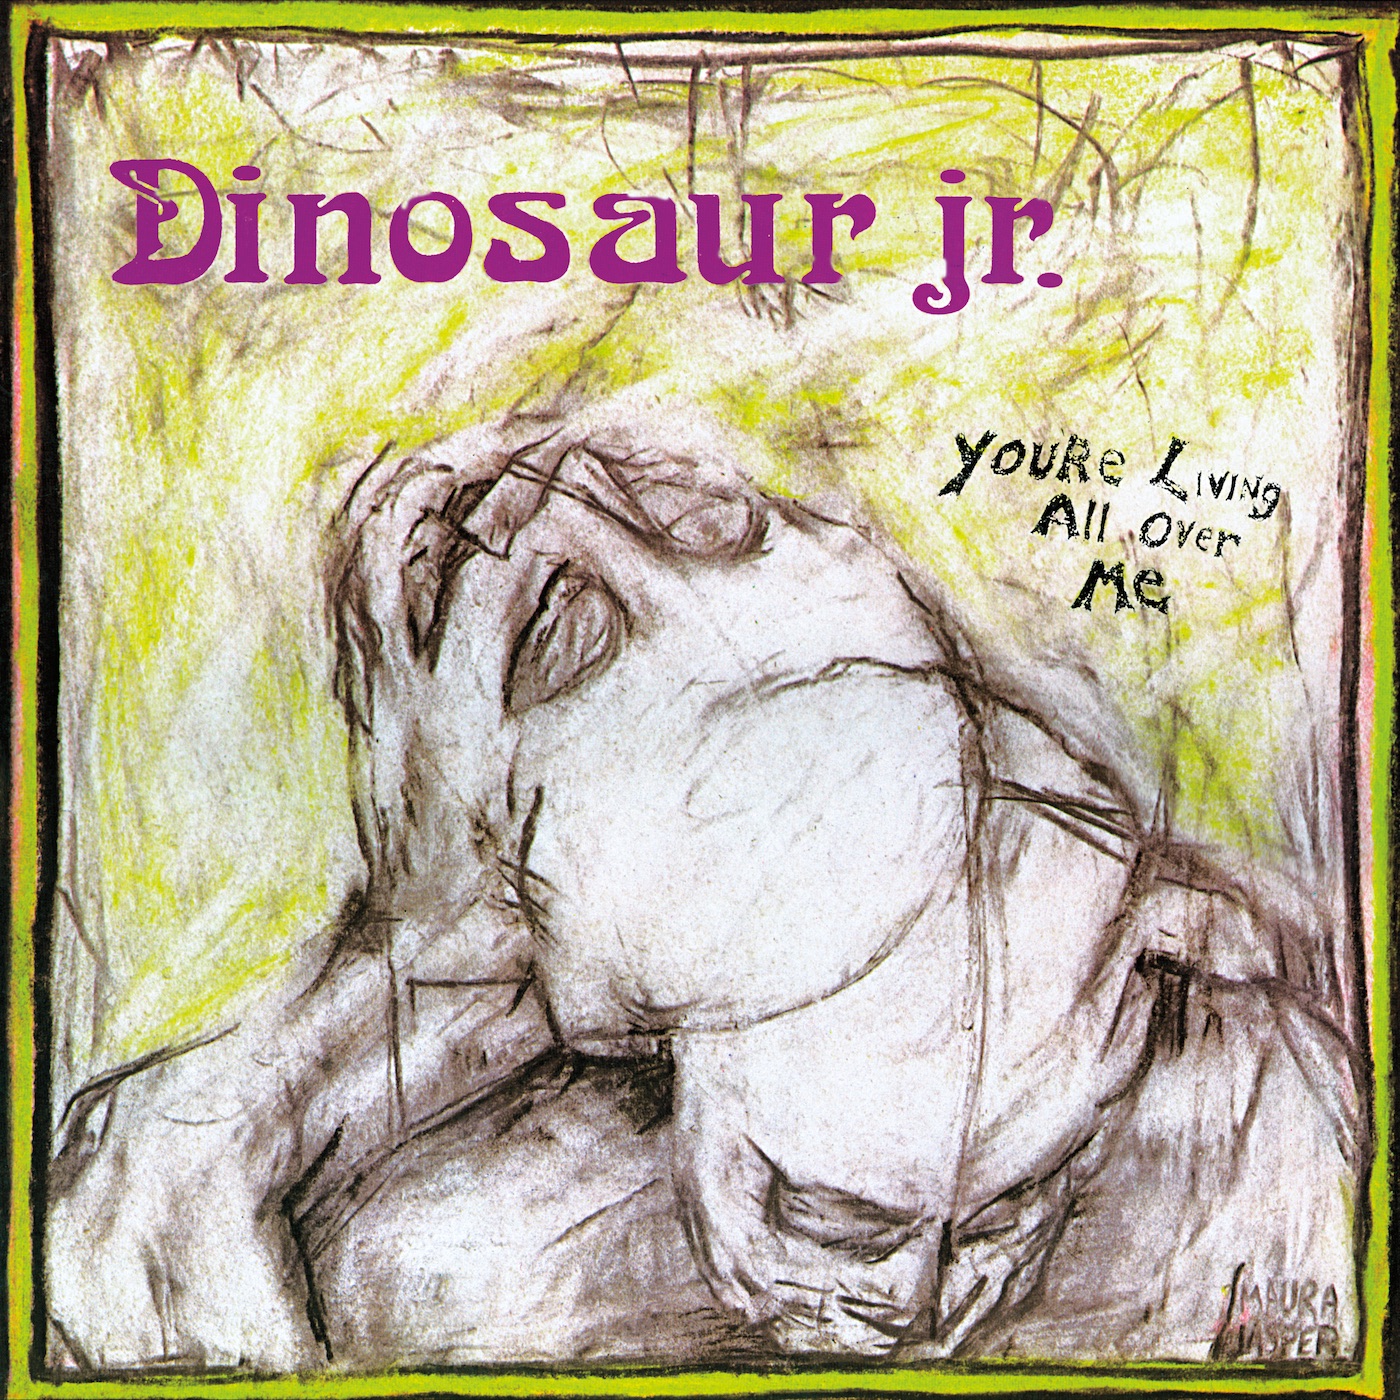 You're Living All Over Me by Dinosaur Jr.